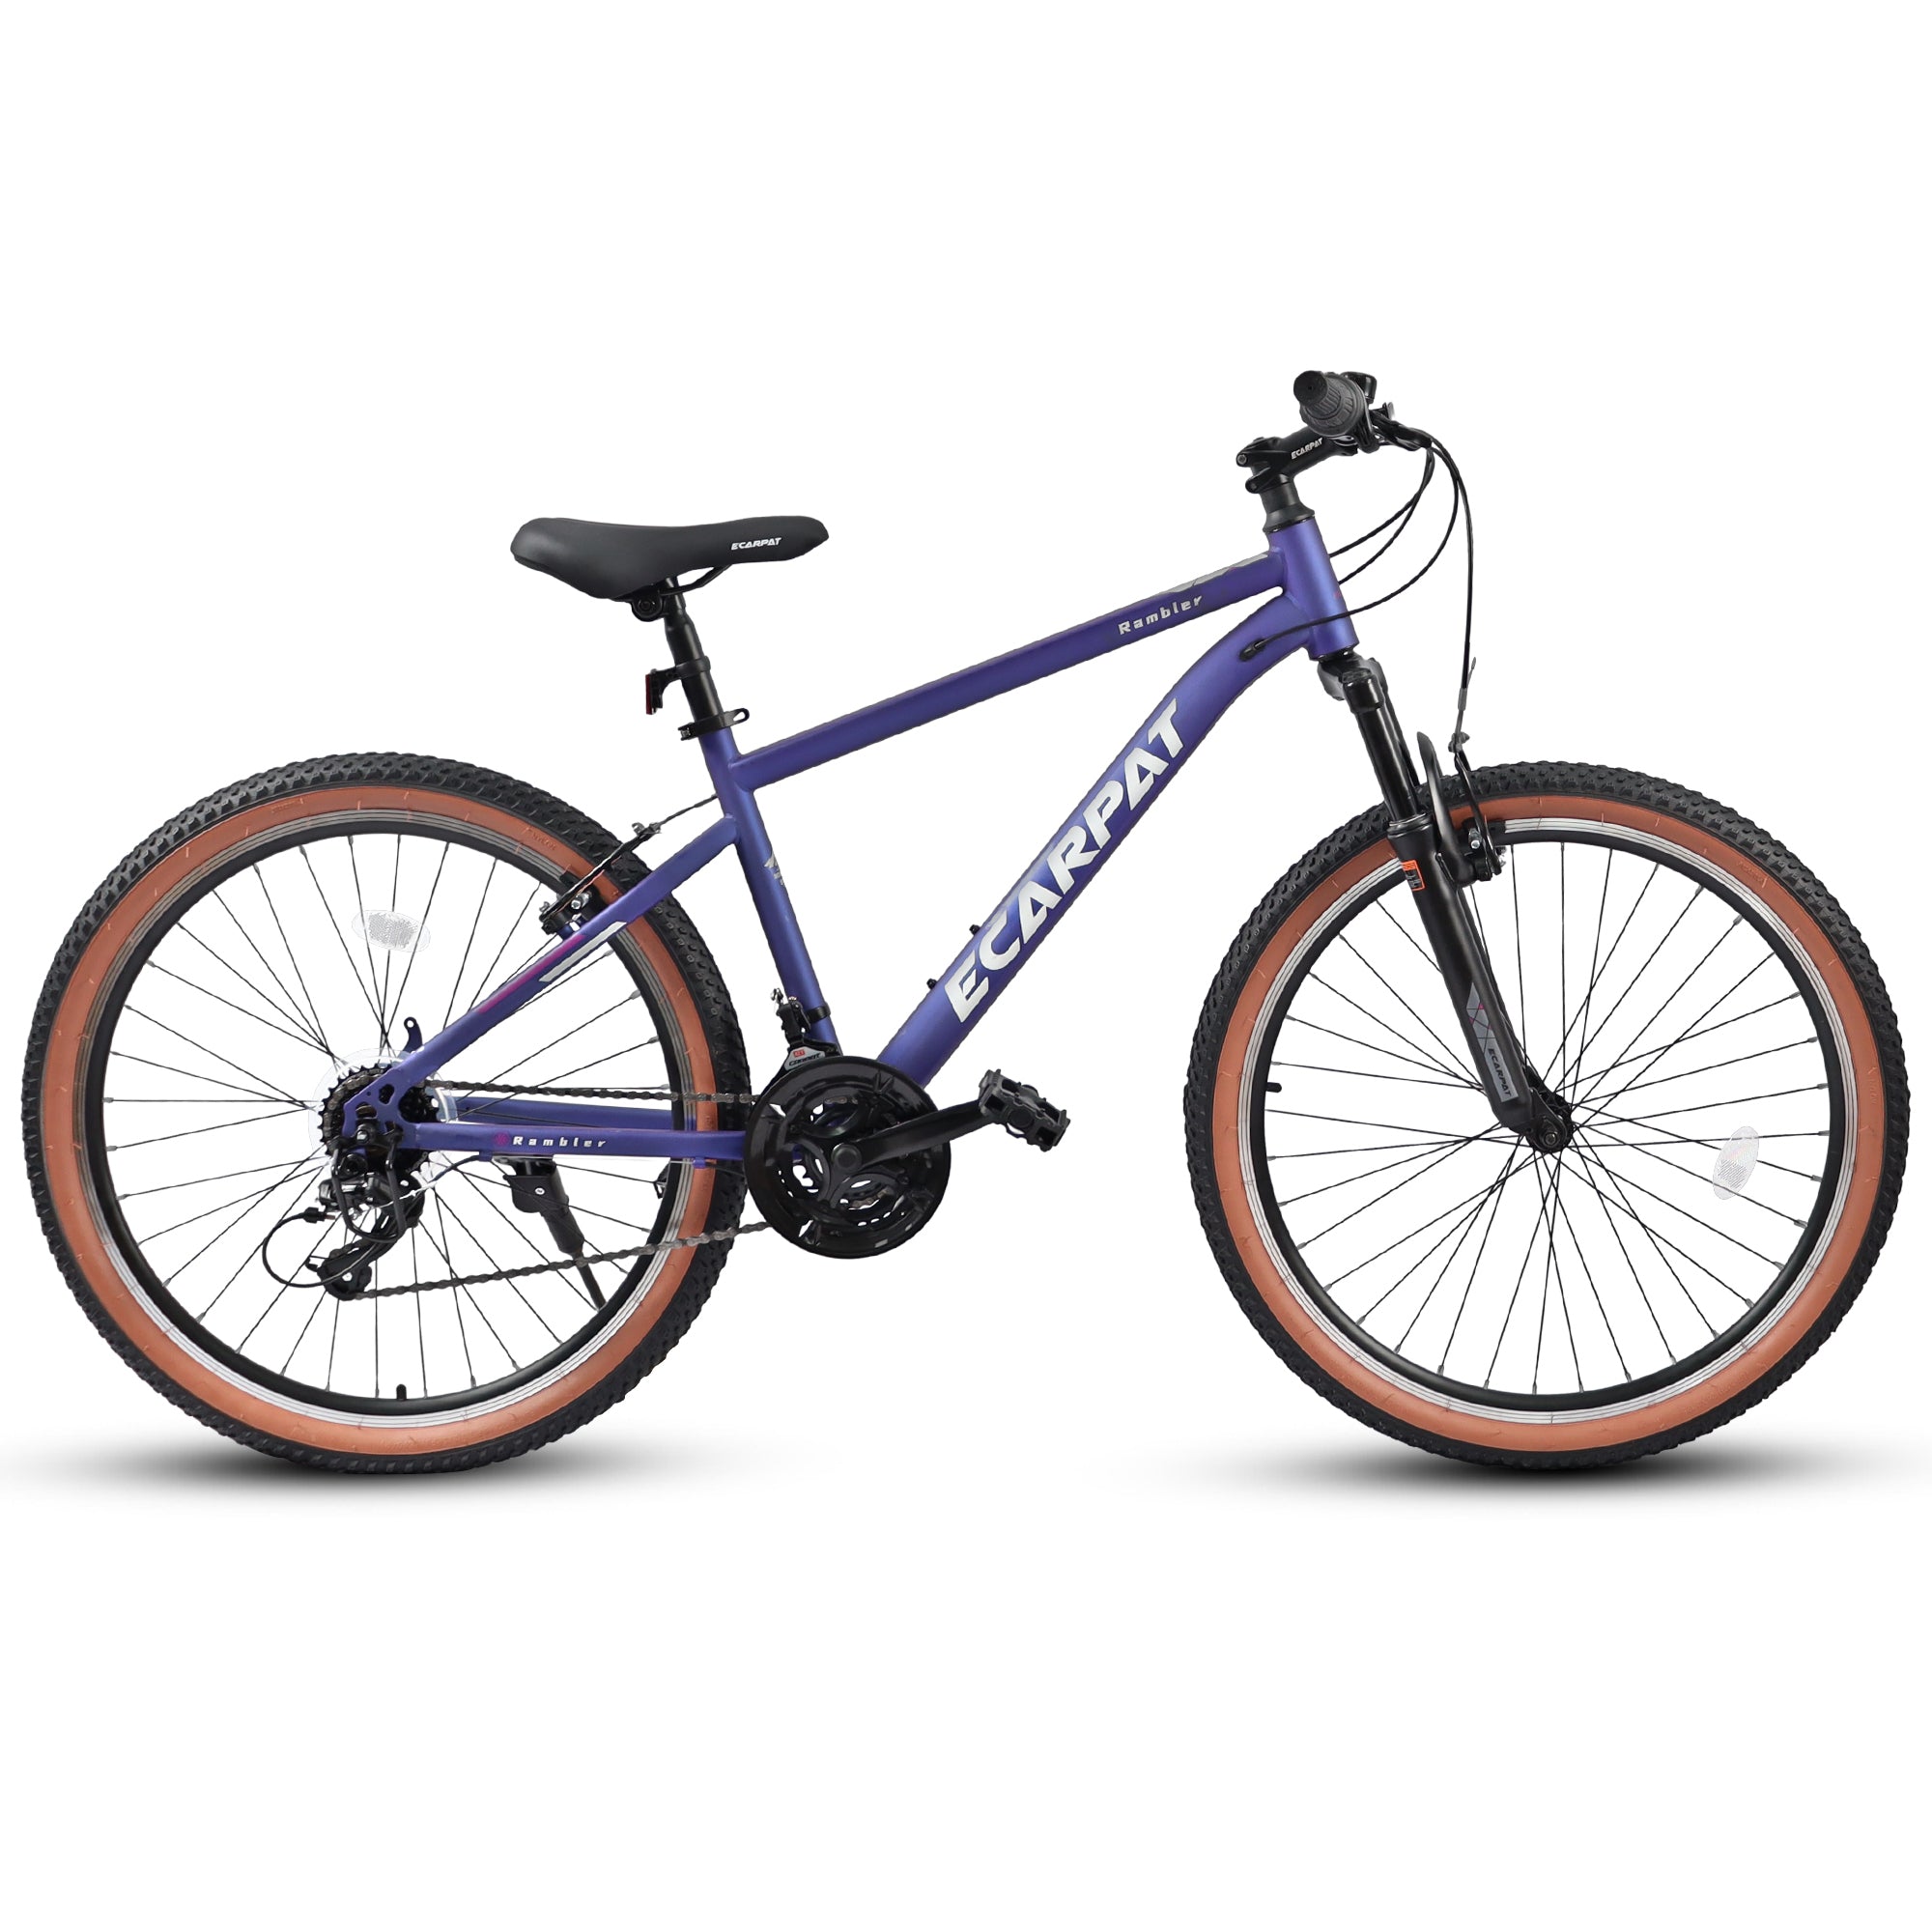 A26301-Ecarpat-Mountain-Bike-26-Inch-Wheels,-21-Speed-Mens-Womens-Trail-Commuter-City-Mountain-Bike,-Carbon-steel-Frame-U-Brakes-Grip-Shifter-Front-Fork-Bicycles-Exercise-&-Fitness